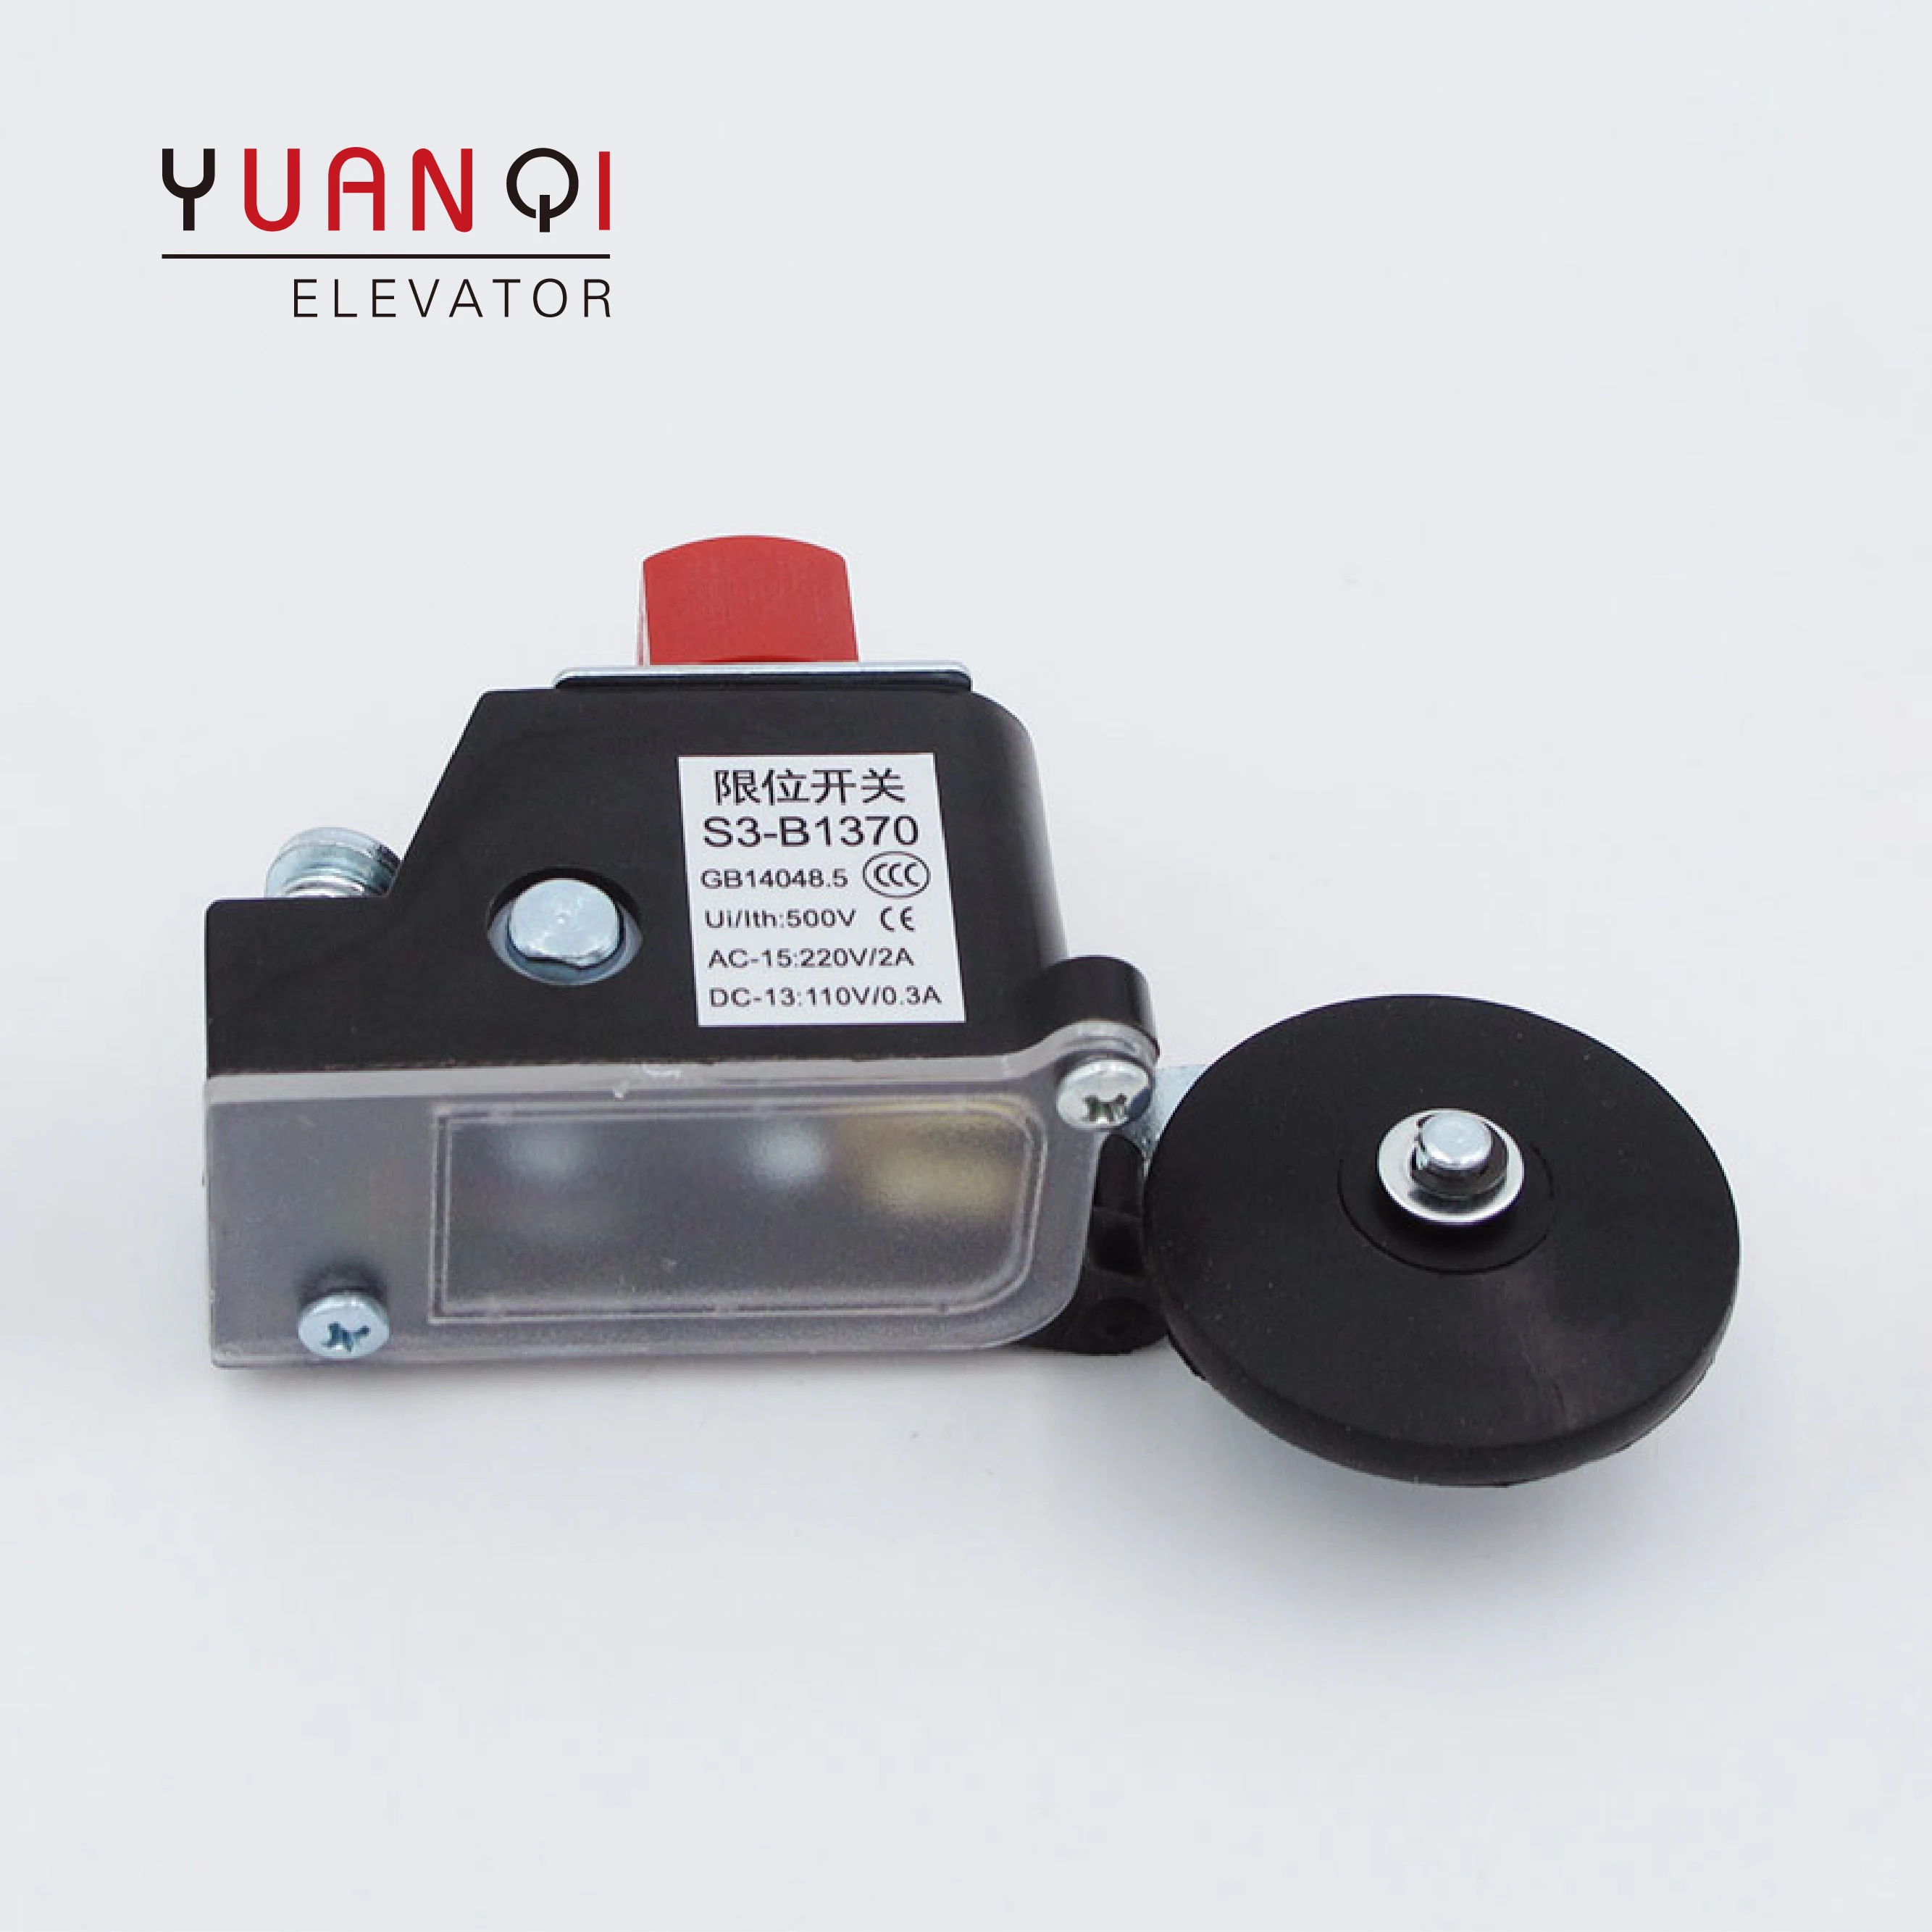 S3-1370 1371 elevator spare parts for mitsubishi,elevator limit switch